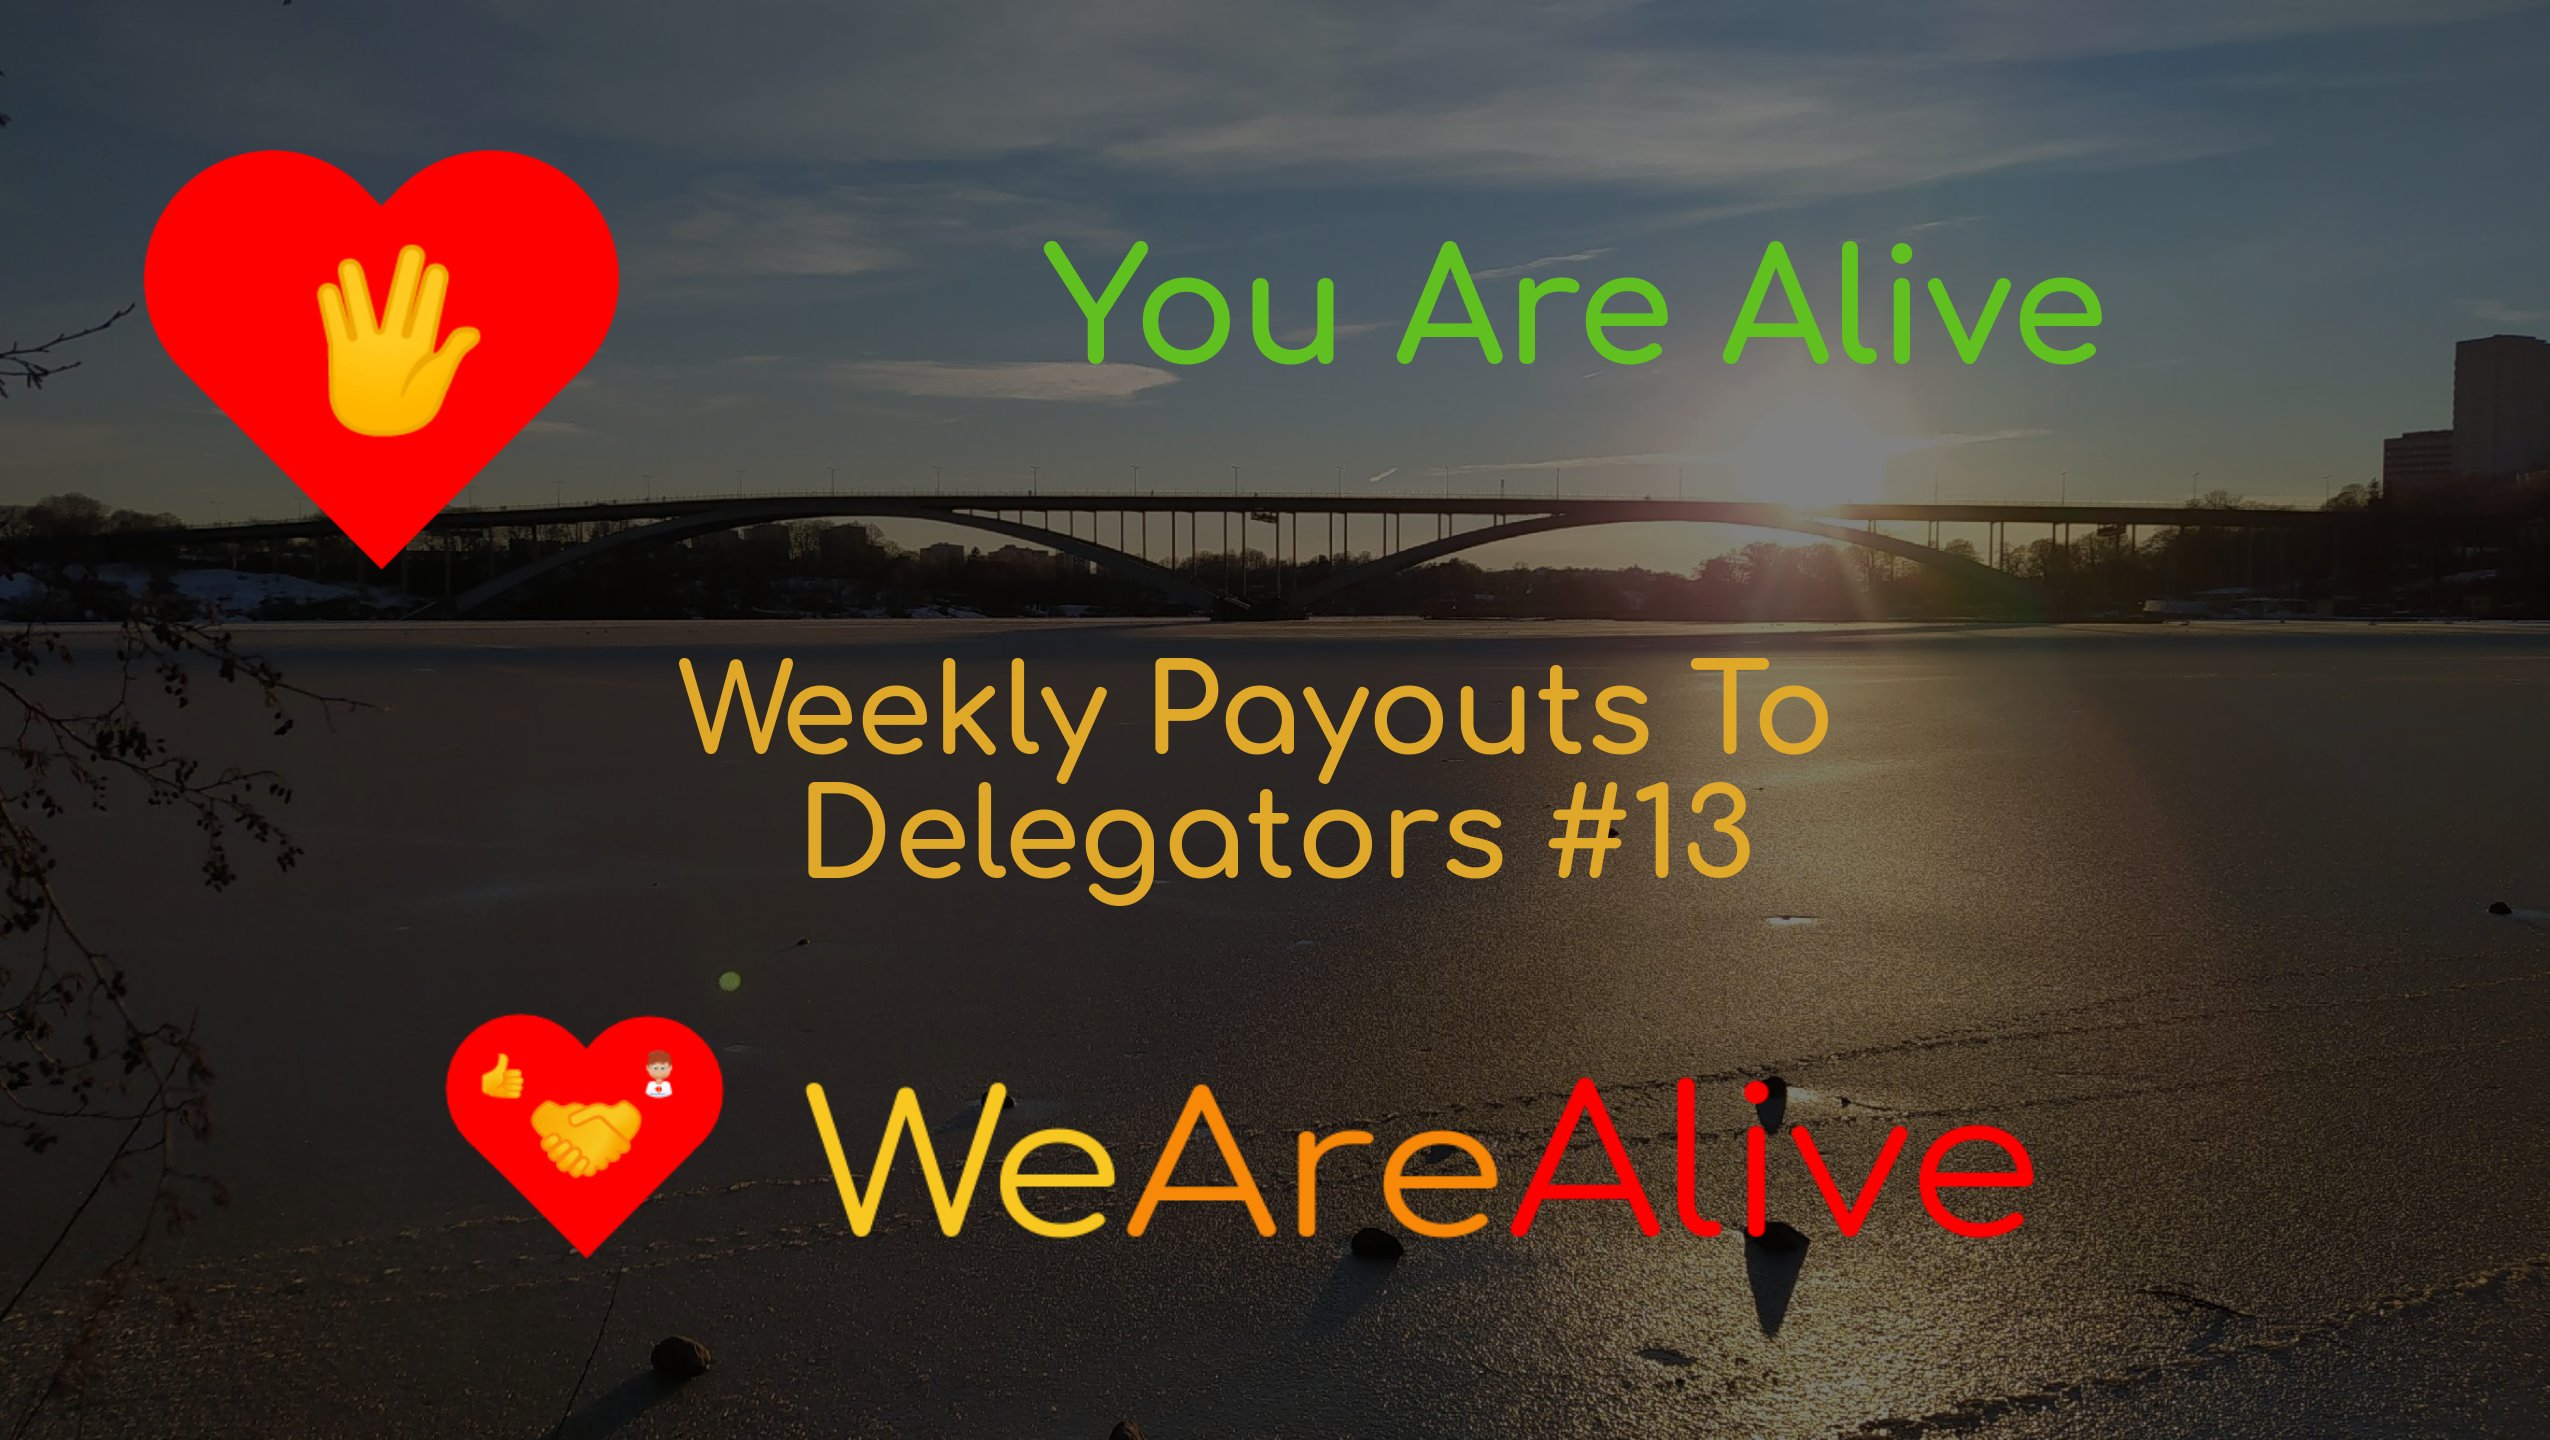 @youarealive/you-are-alive-weekly-payouts-to-delegators-13